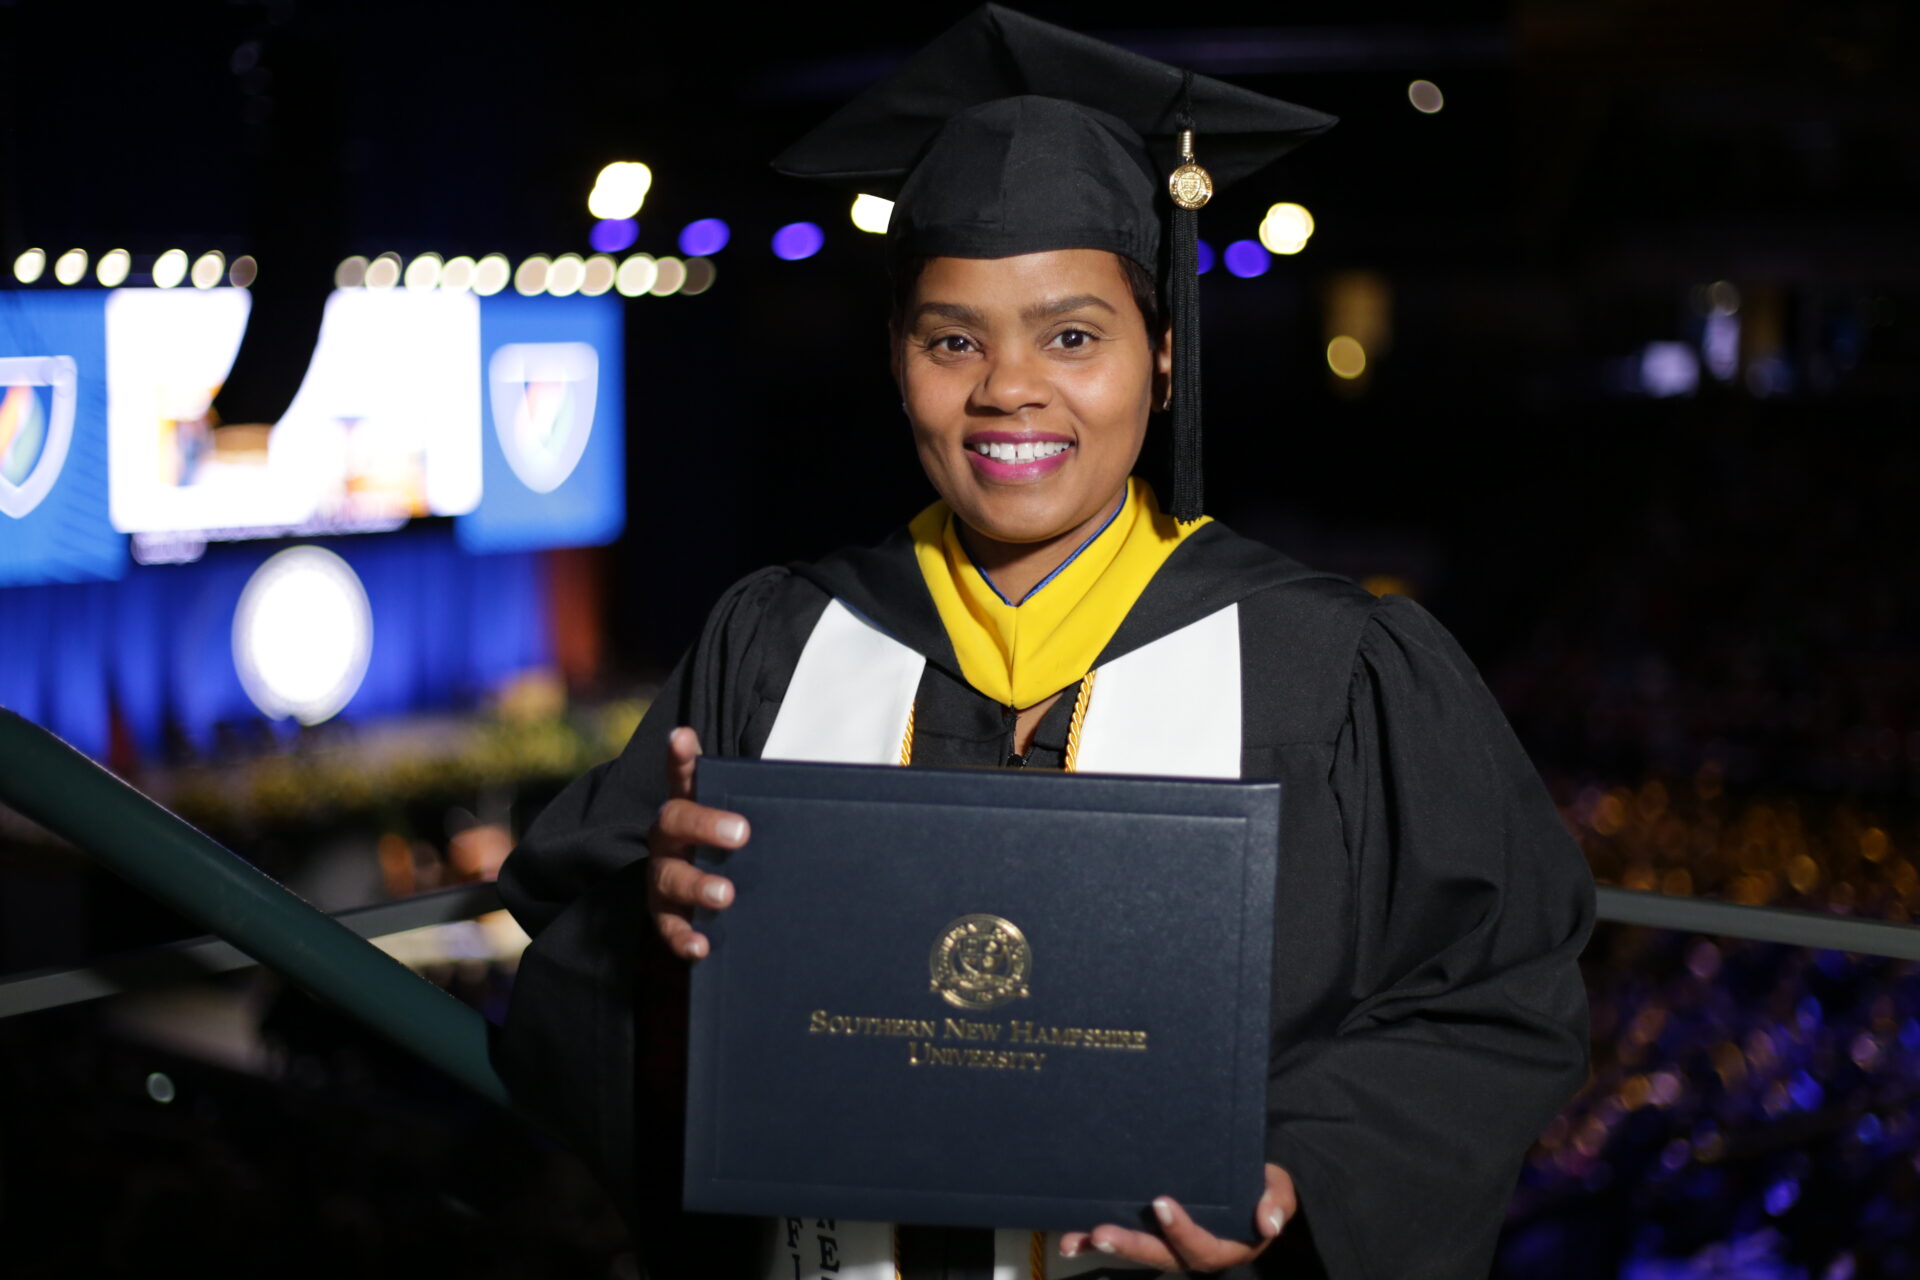 Eleshia Louis ’22 - Center for Higher Education Policy and Practice